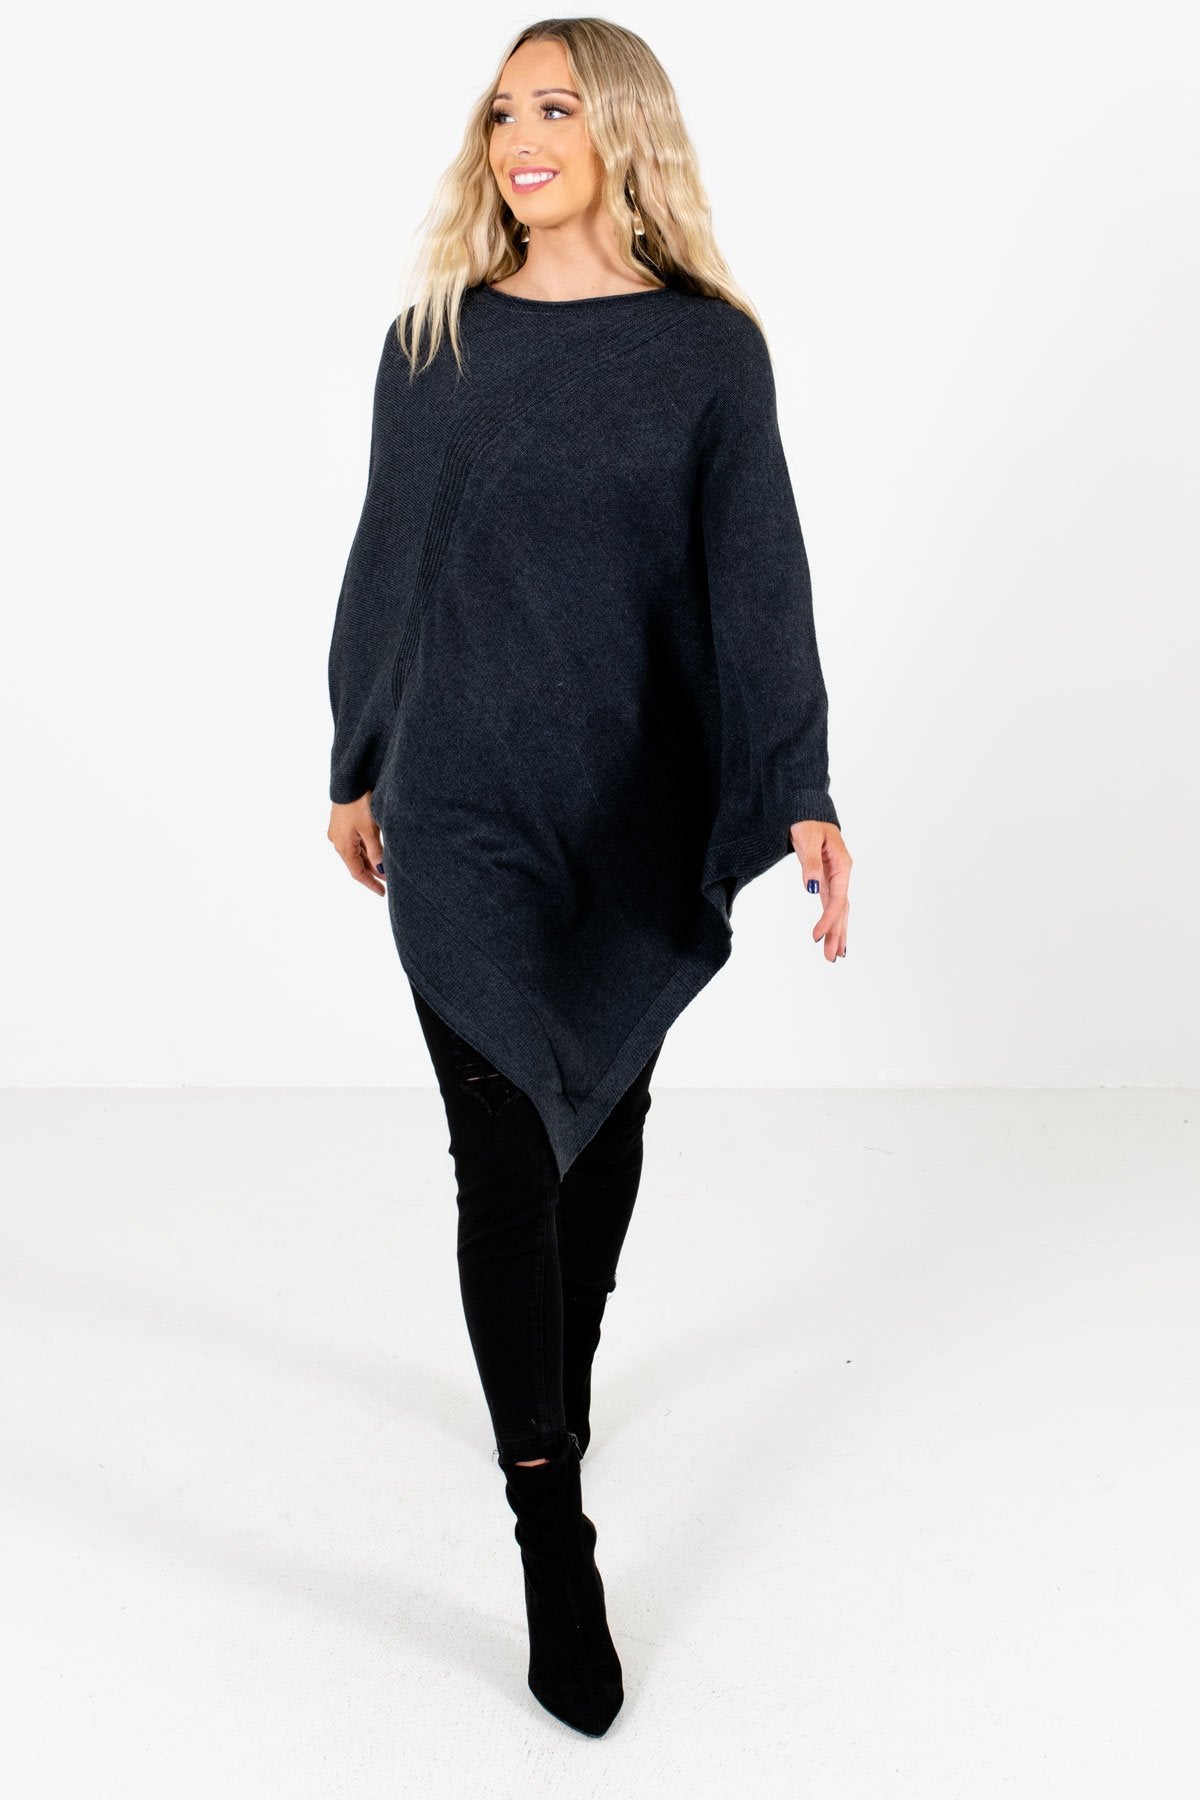 Women's Charcoal Gray Warm and Cozy Boutique Sweater Ponchos